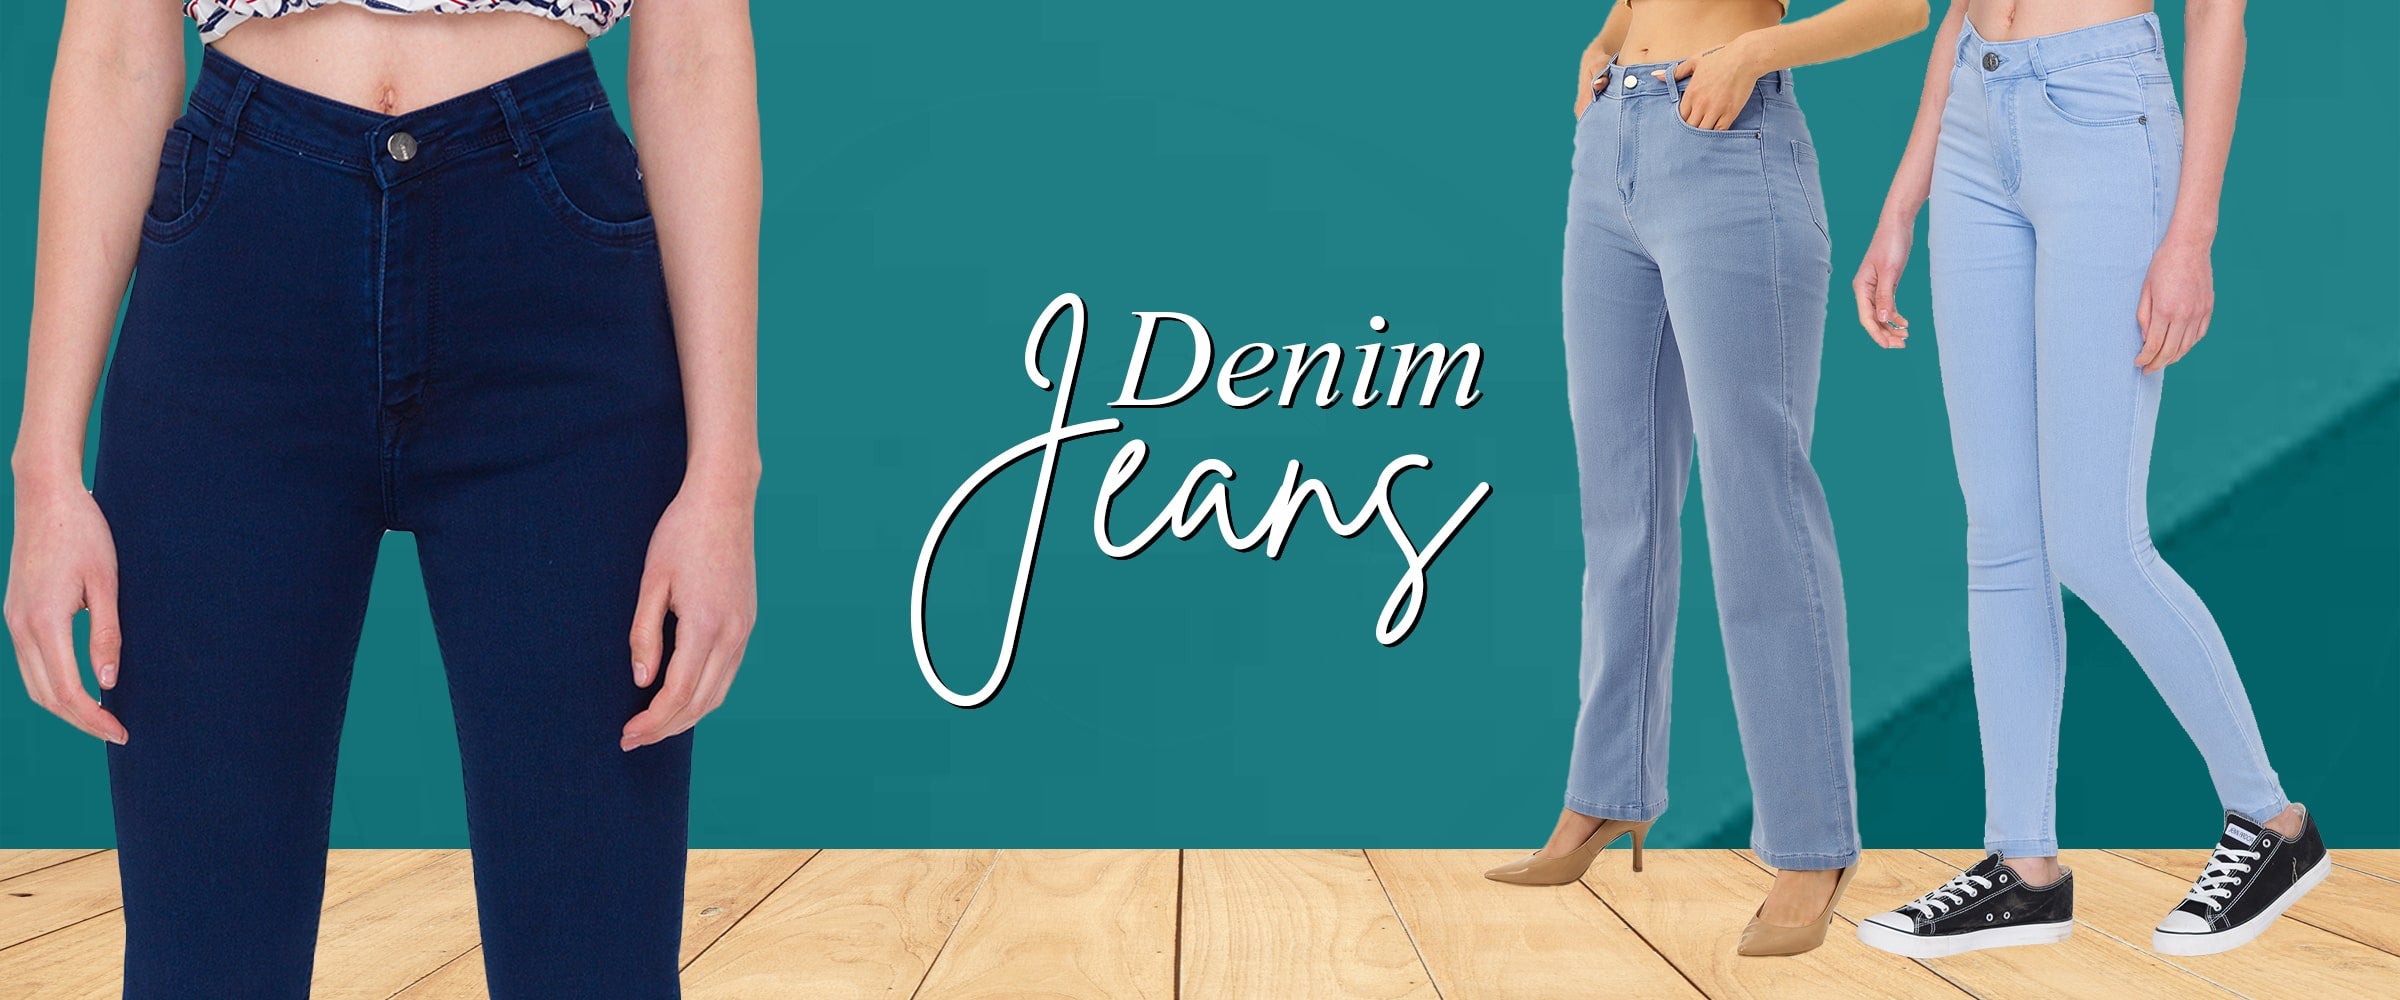 New Year Chic: Stylish Women's Denim for Every Look